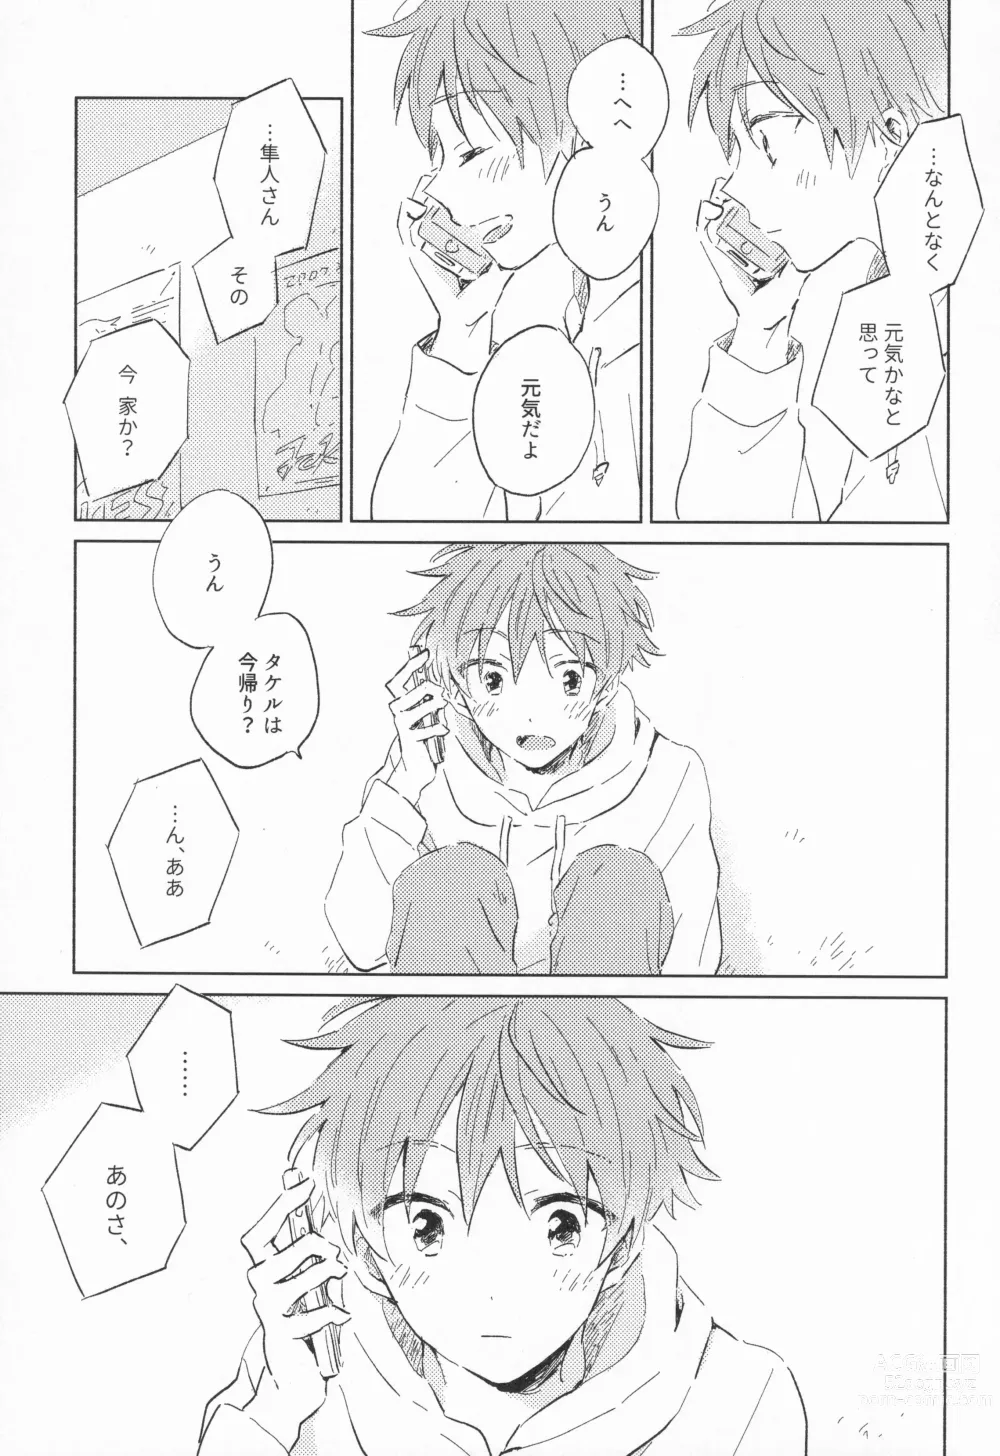 Page 14 of doujinshi 21-ji ni Machiawase - On the stroke of 9pm, the spell will be broken